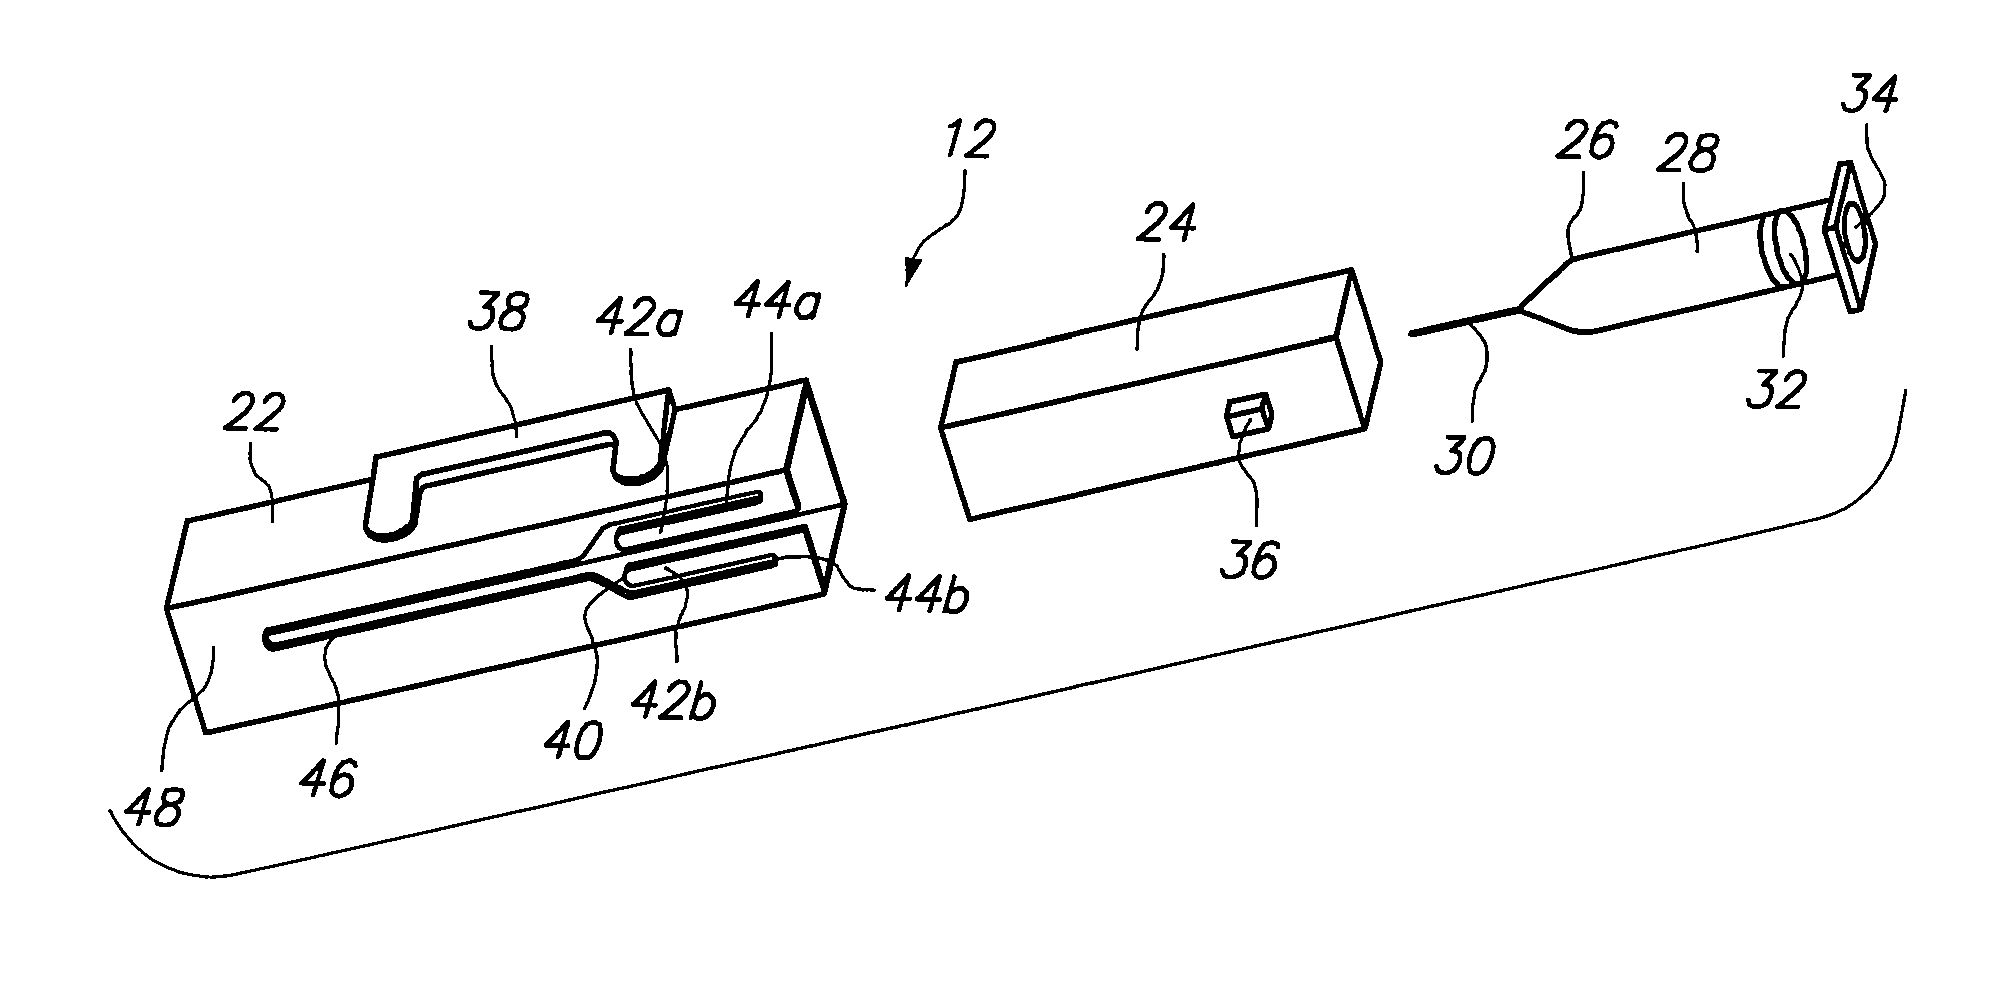 System and method for an injection using a syringe needle